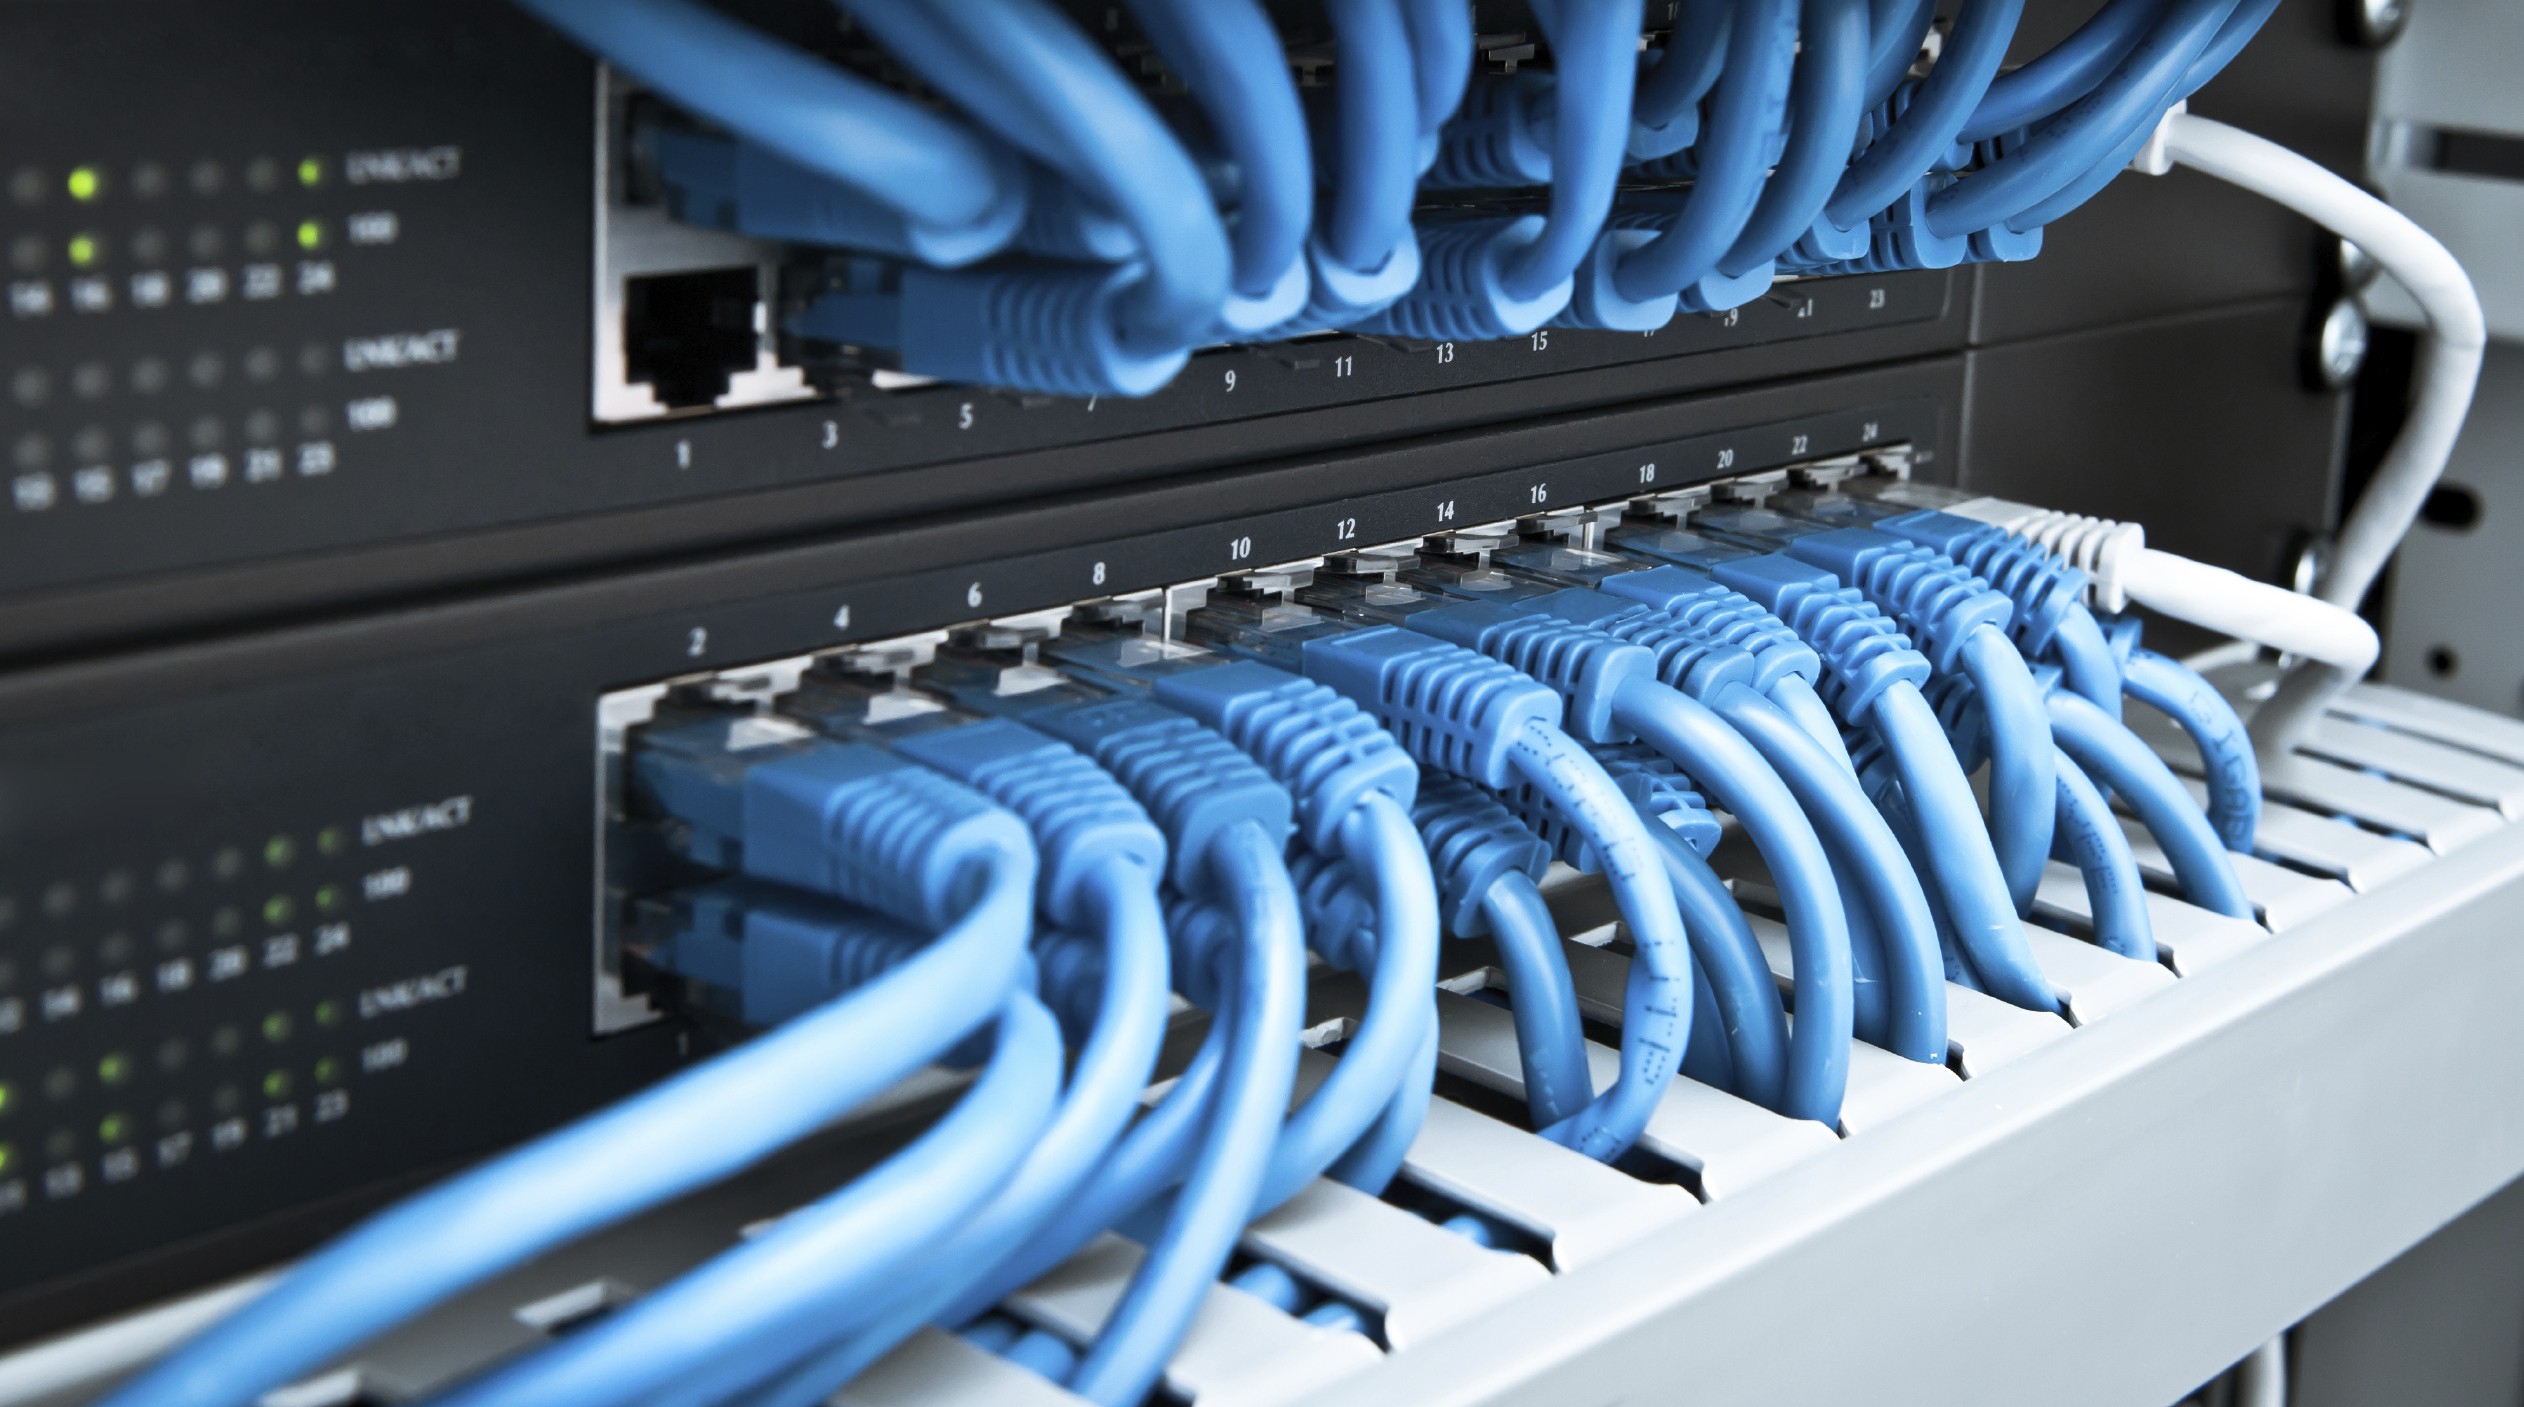 Warsaw Kentucky Premier Voice & Data Network Cabling Contractor